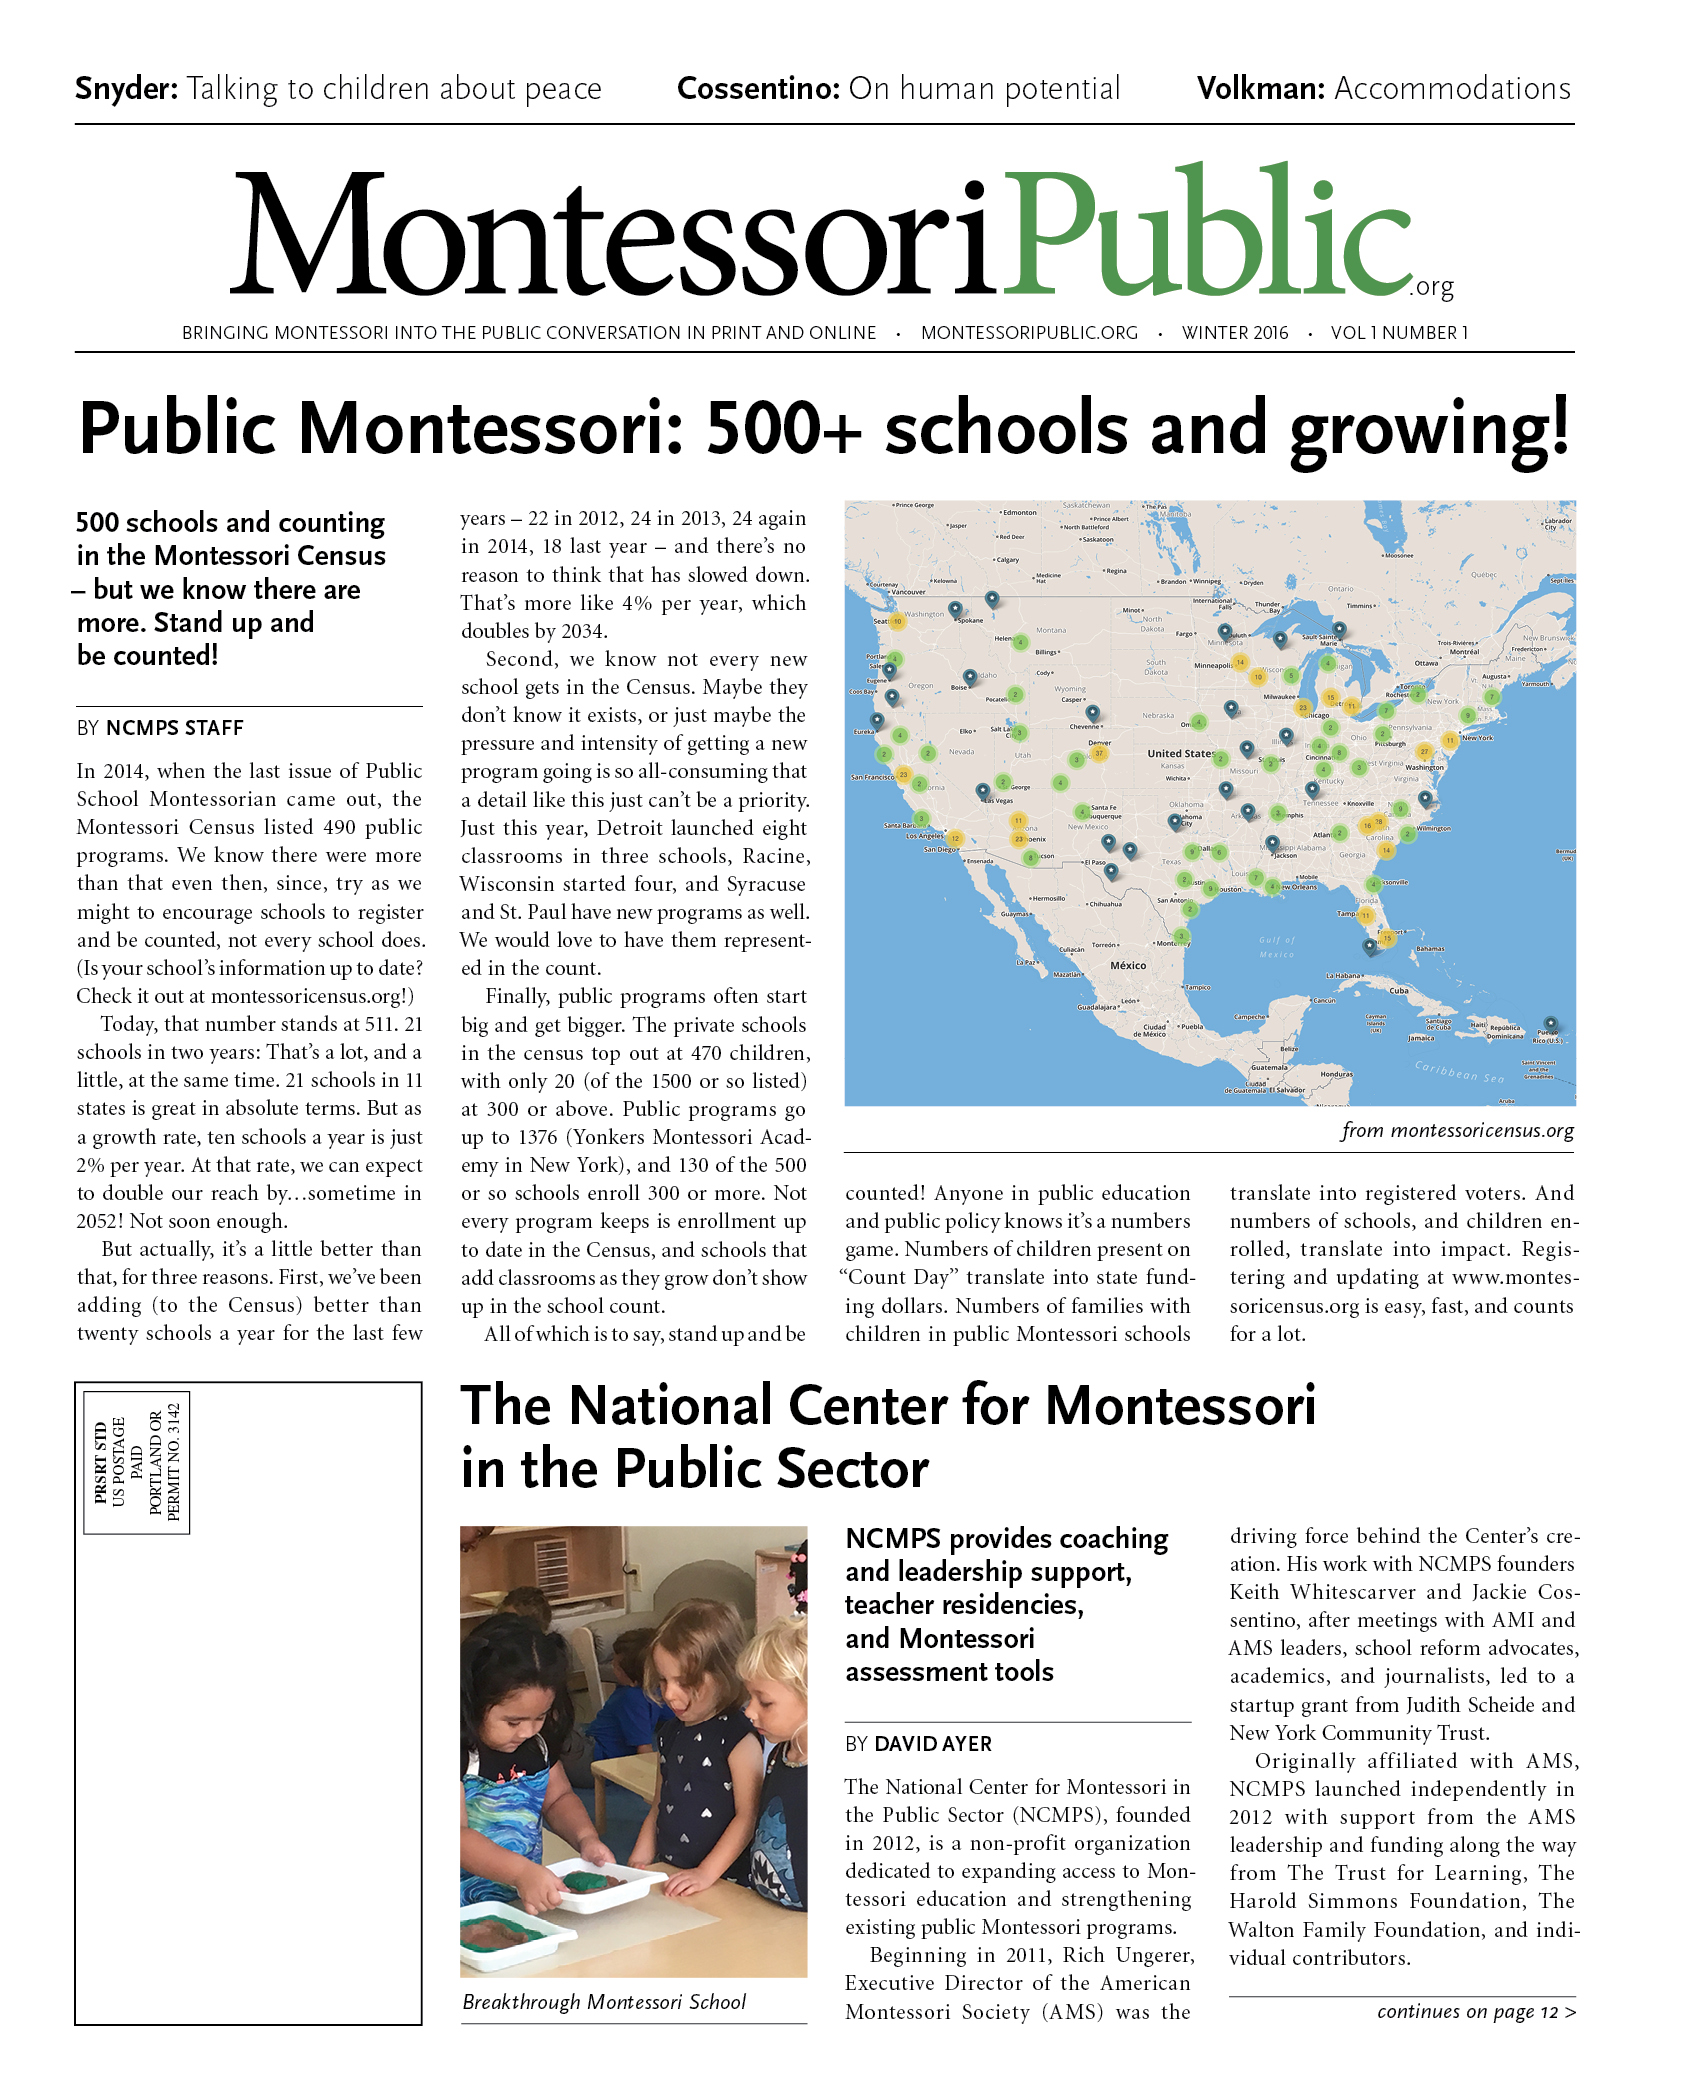 MontessoriPublic — Print Edition #2: Charters and Choice